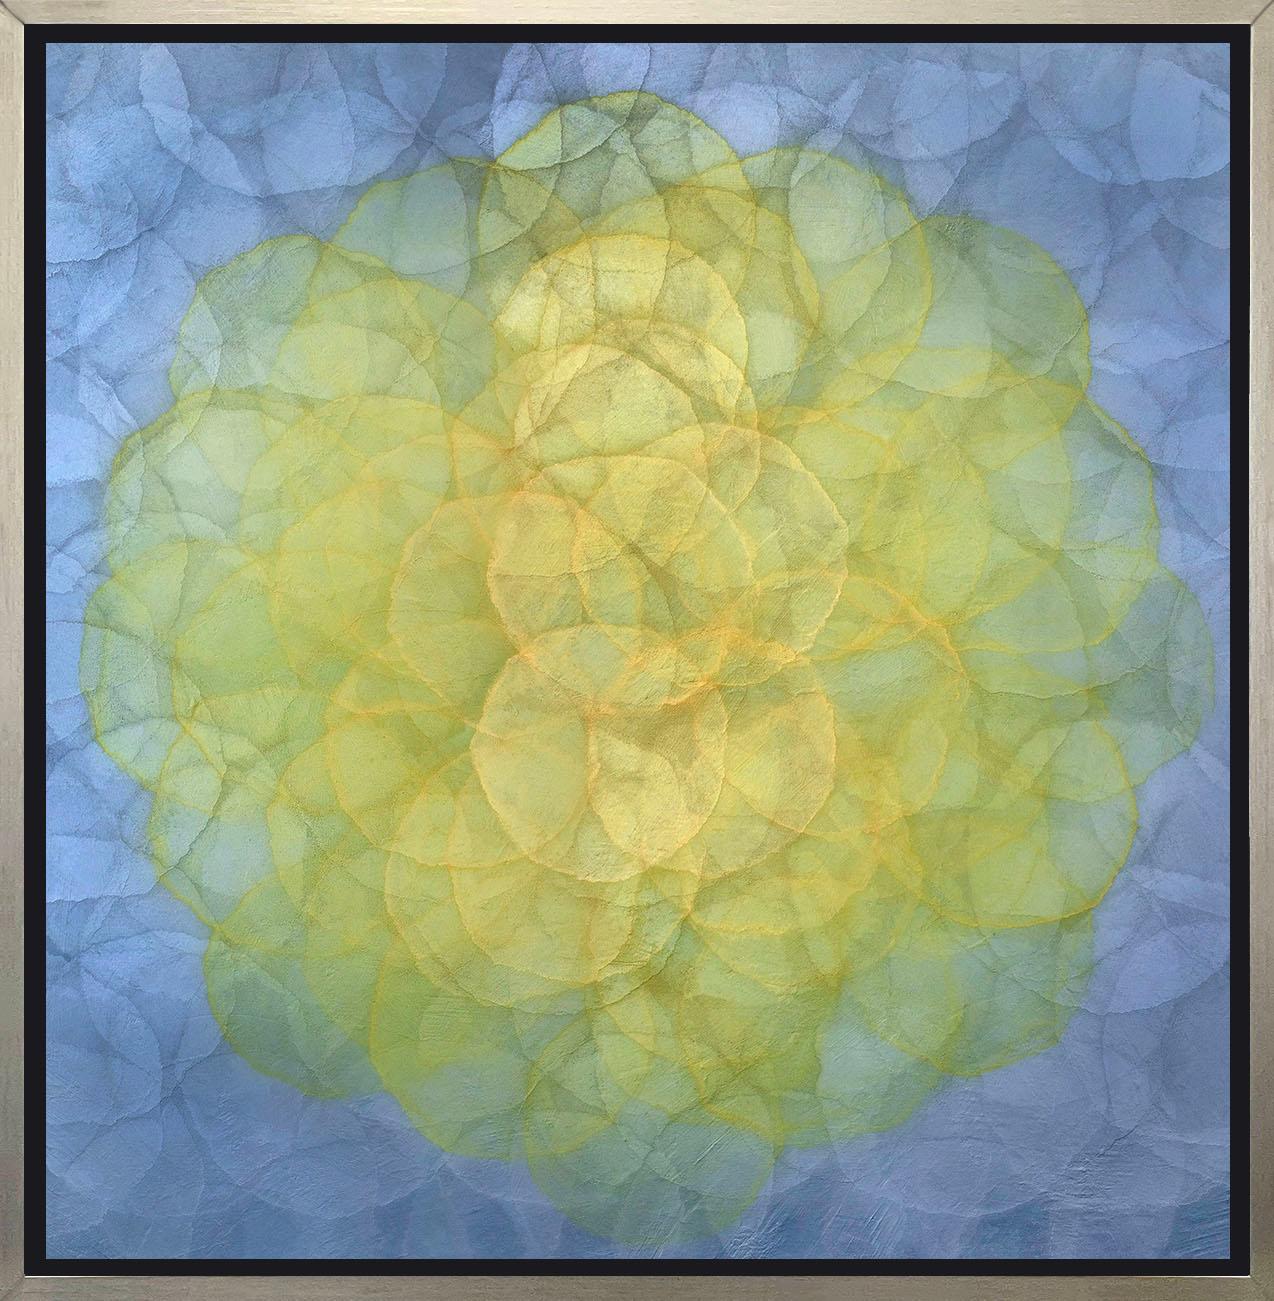 Roger Mudre Abstract Print - "Triteleia, " Framed Limited Edition Giclee Print, 53" x 53"